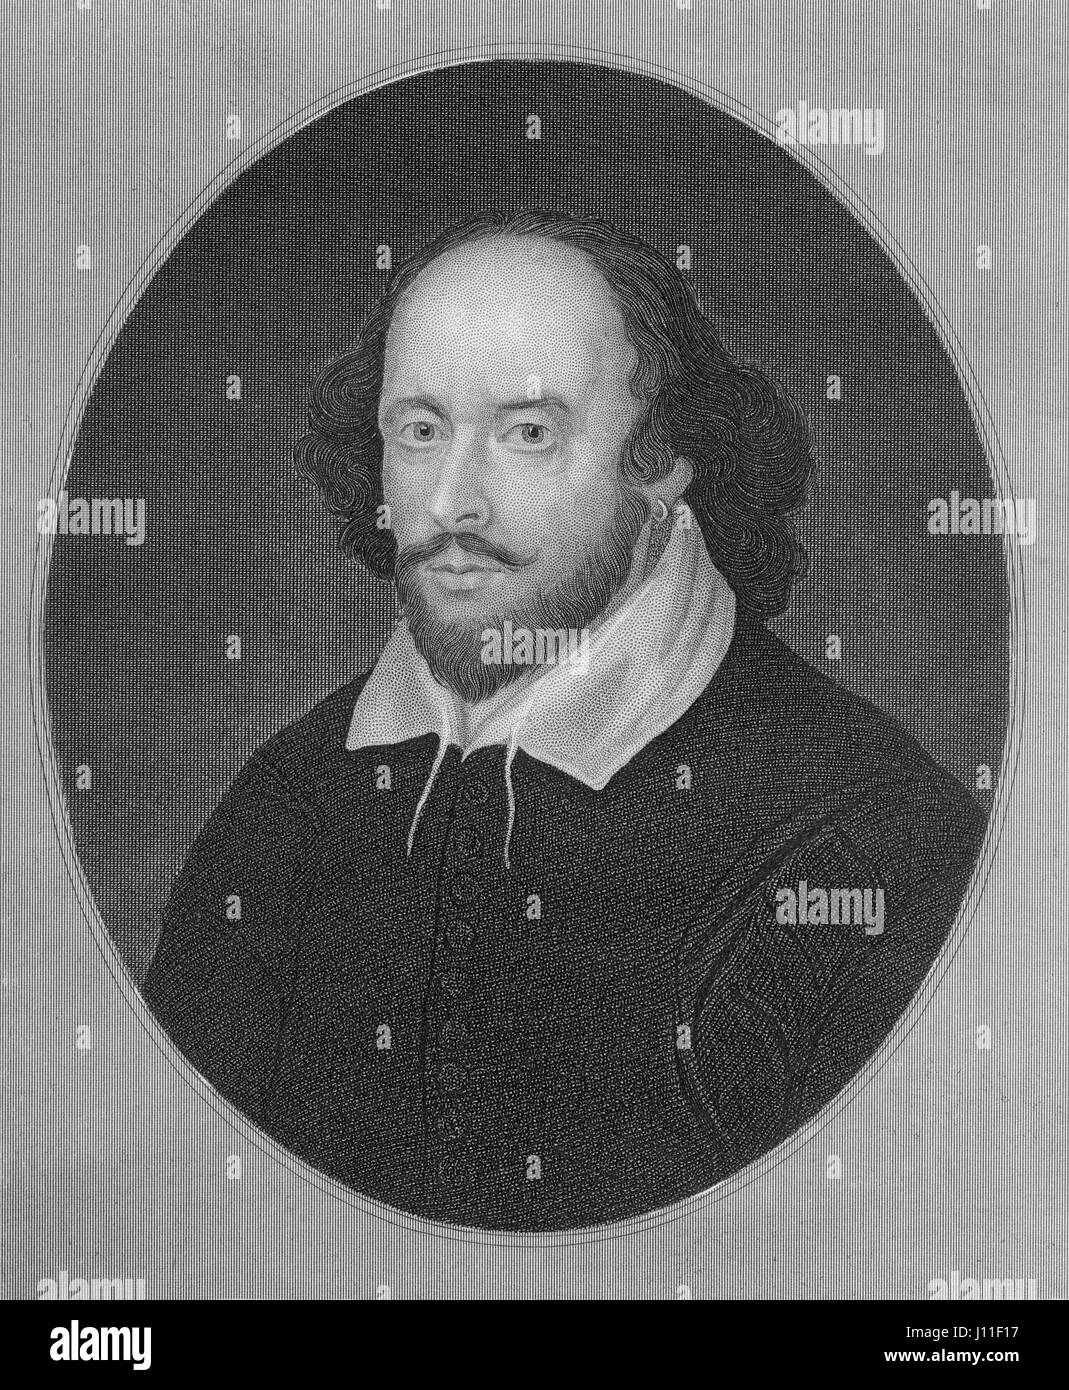 William Shakespeare (1564-1616), English Poet, Playwright and Actor, Portrait Stock Photo